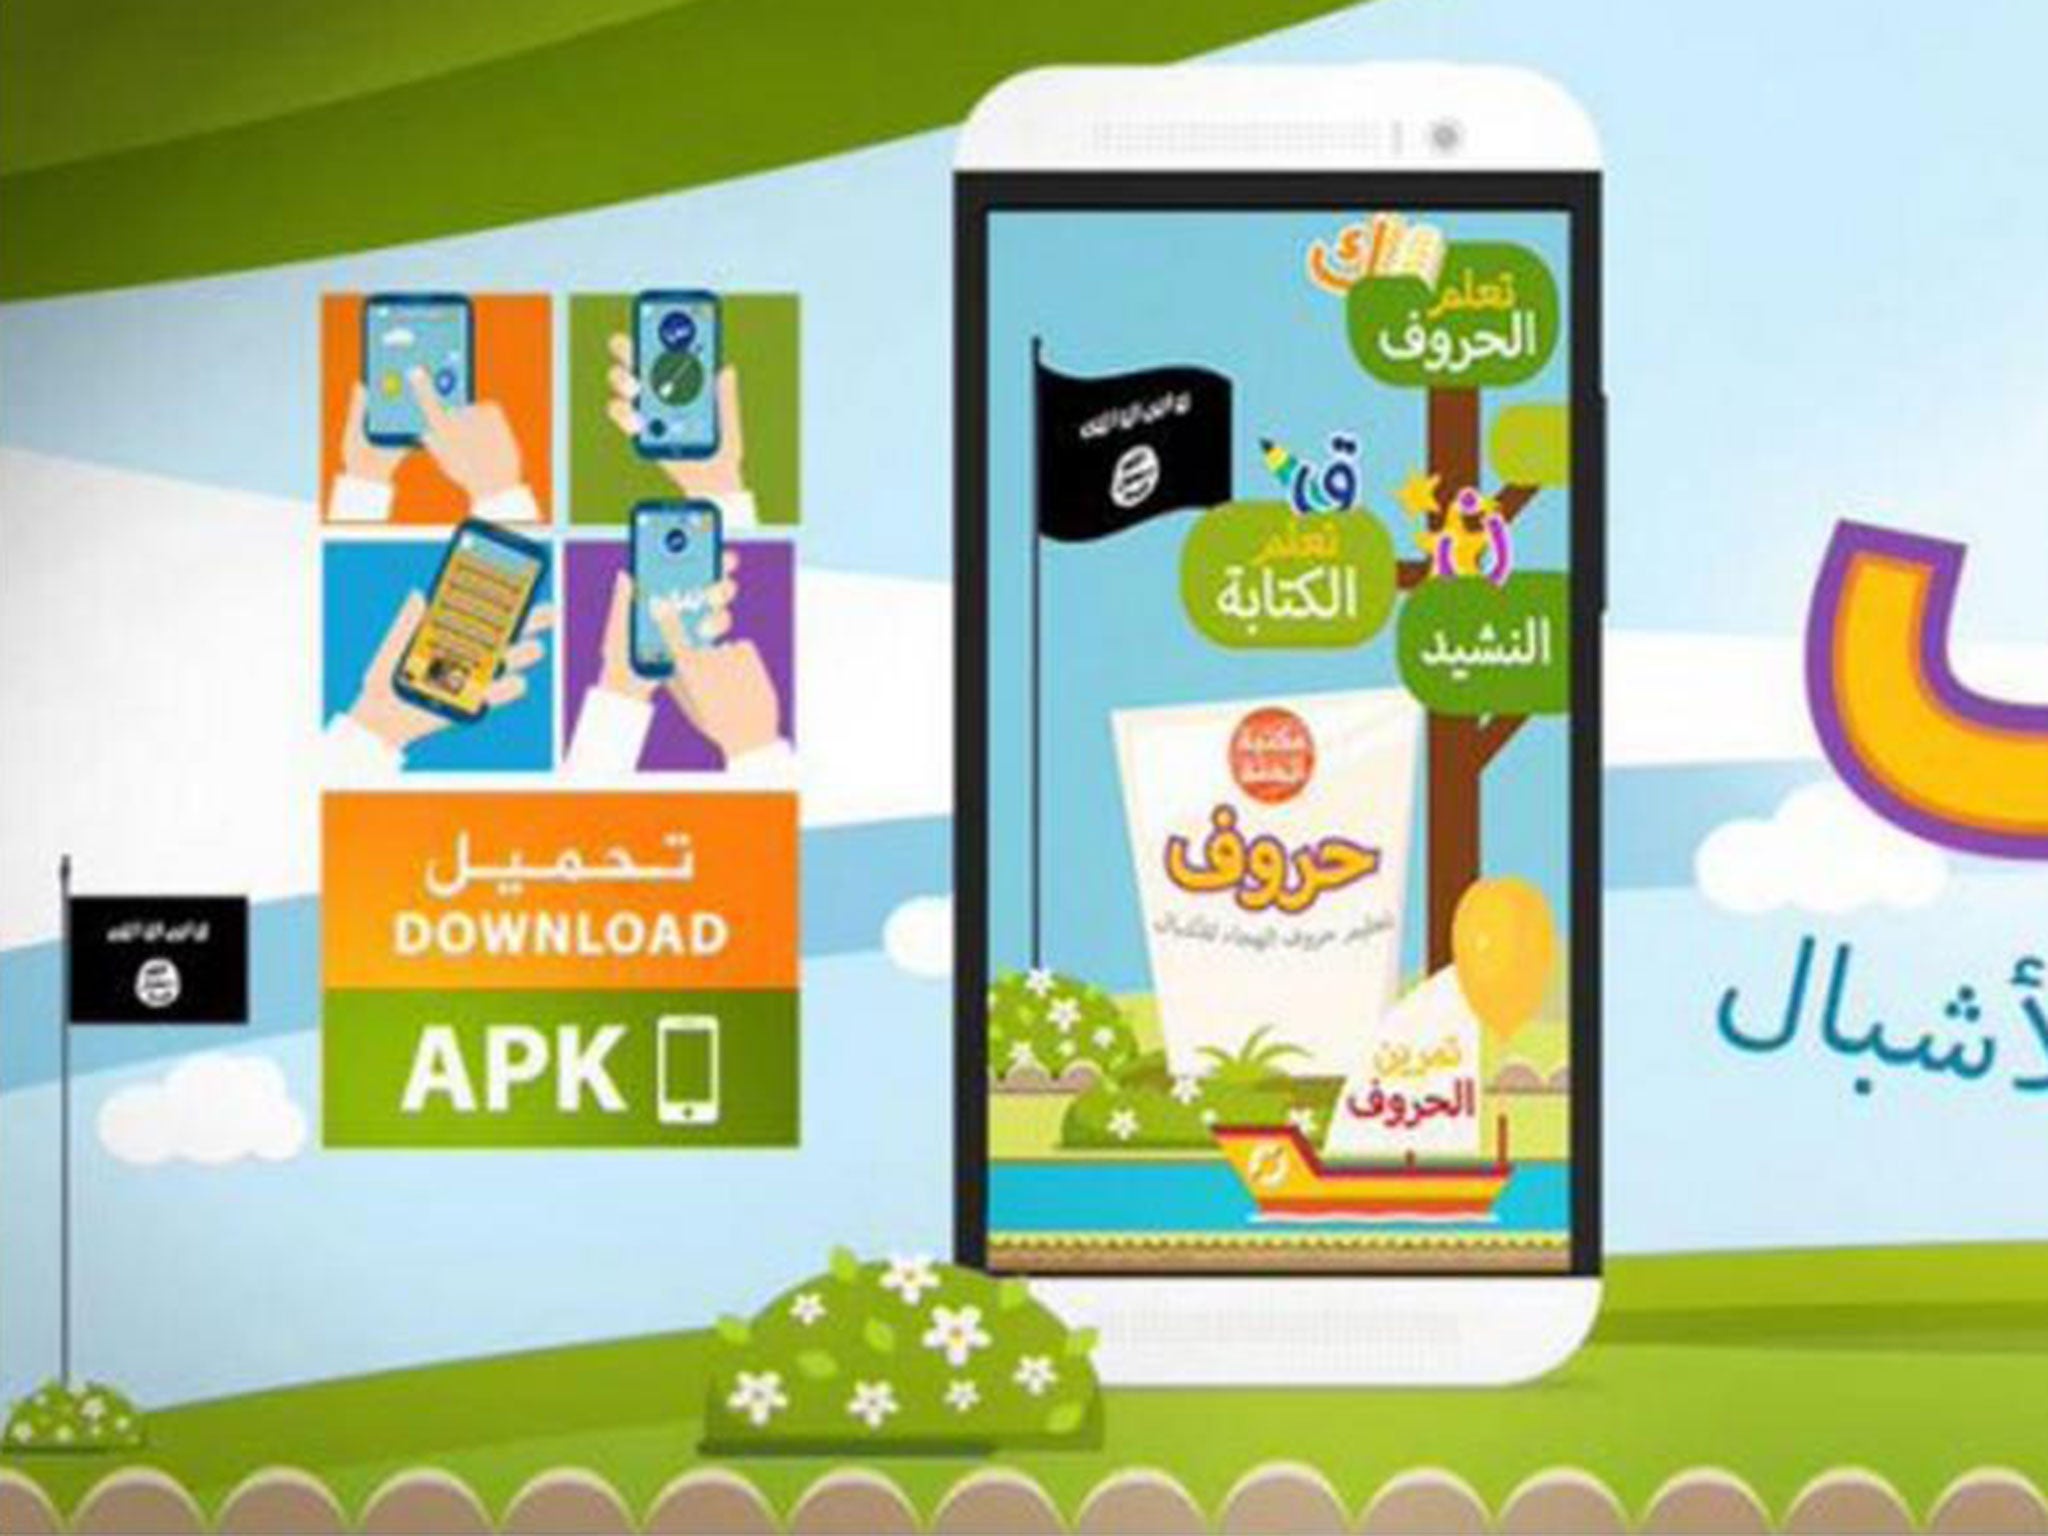 Isis Releases App For Children To Learn Arabic Alphabet Using